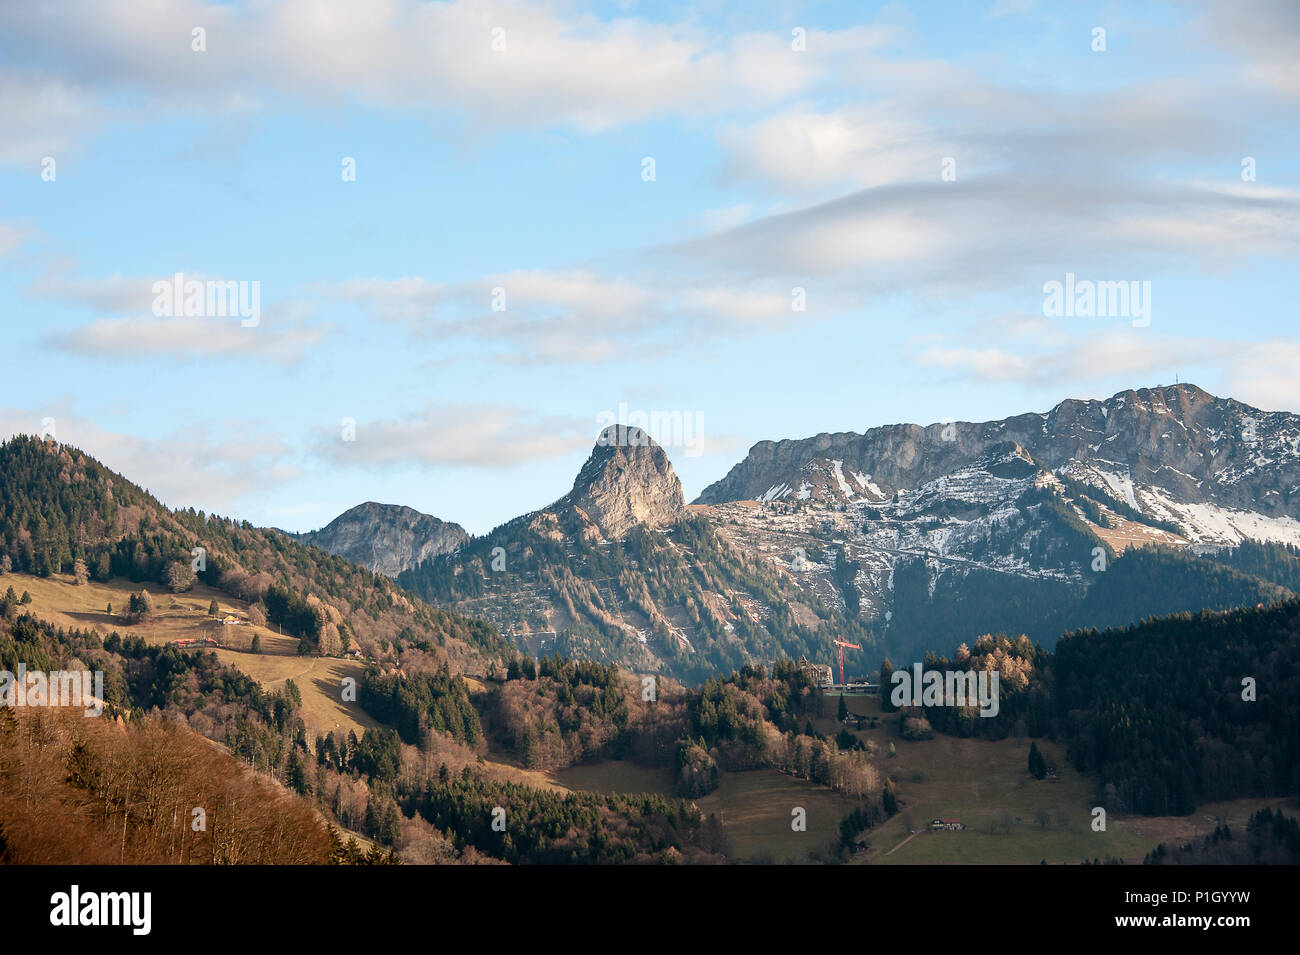 Panoramic view of snow capped mountain peaks , Col de Jaman, Switzerland. Beautiful landscape, autumn colours, forested slopes and a soft blue sky Stock Photo